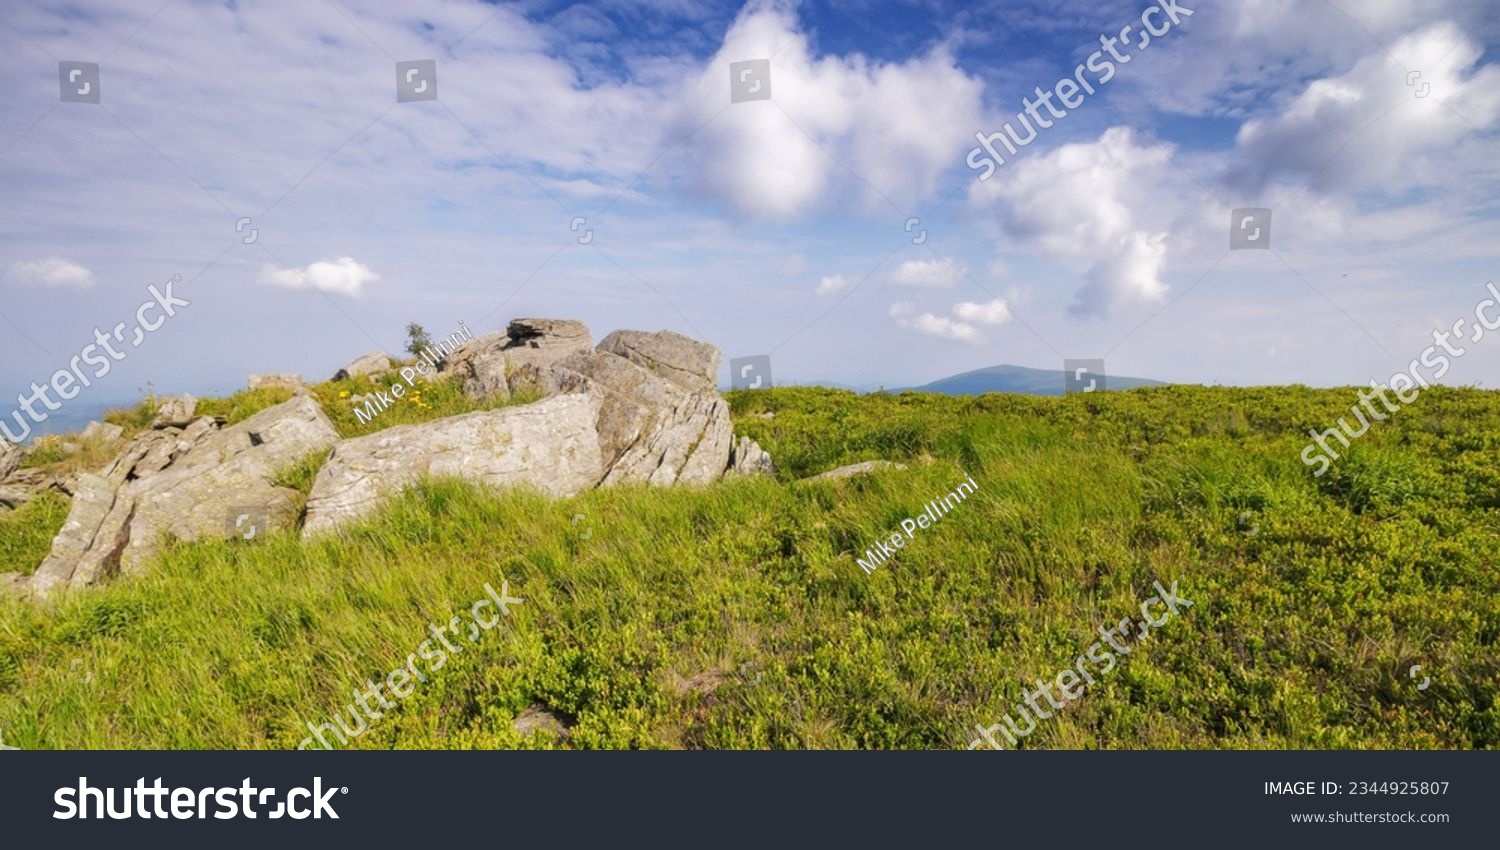 wonderful summer landscape in mountains. grassy meadows and rolling hills. boulders and stones on the hillside. picturesque scene in morning light. ukrainian carpathians countryside scenery #2344925807